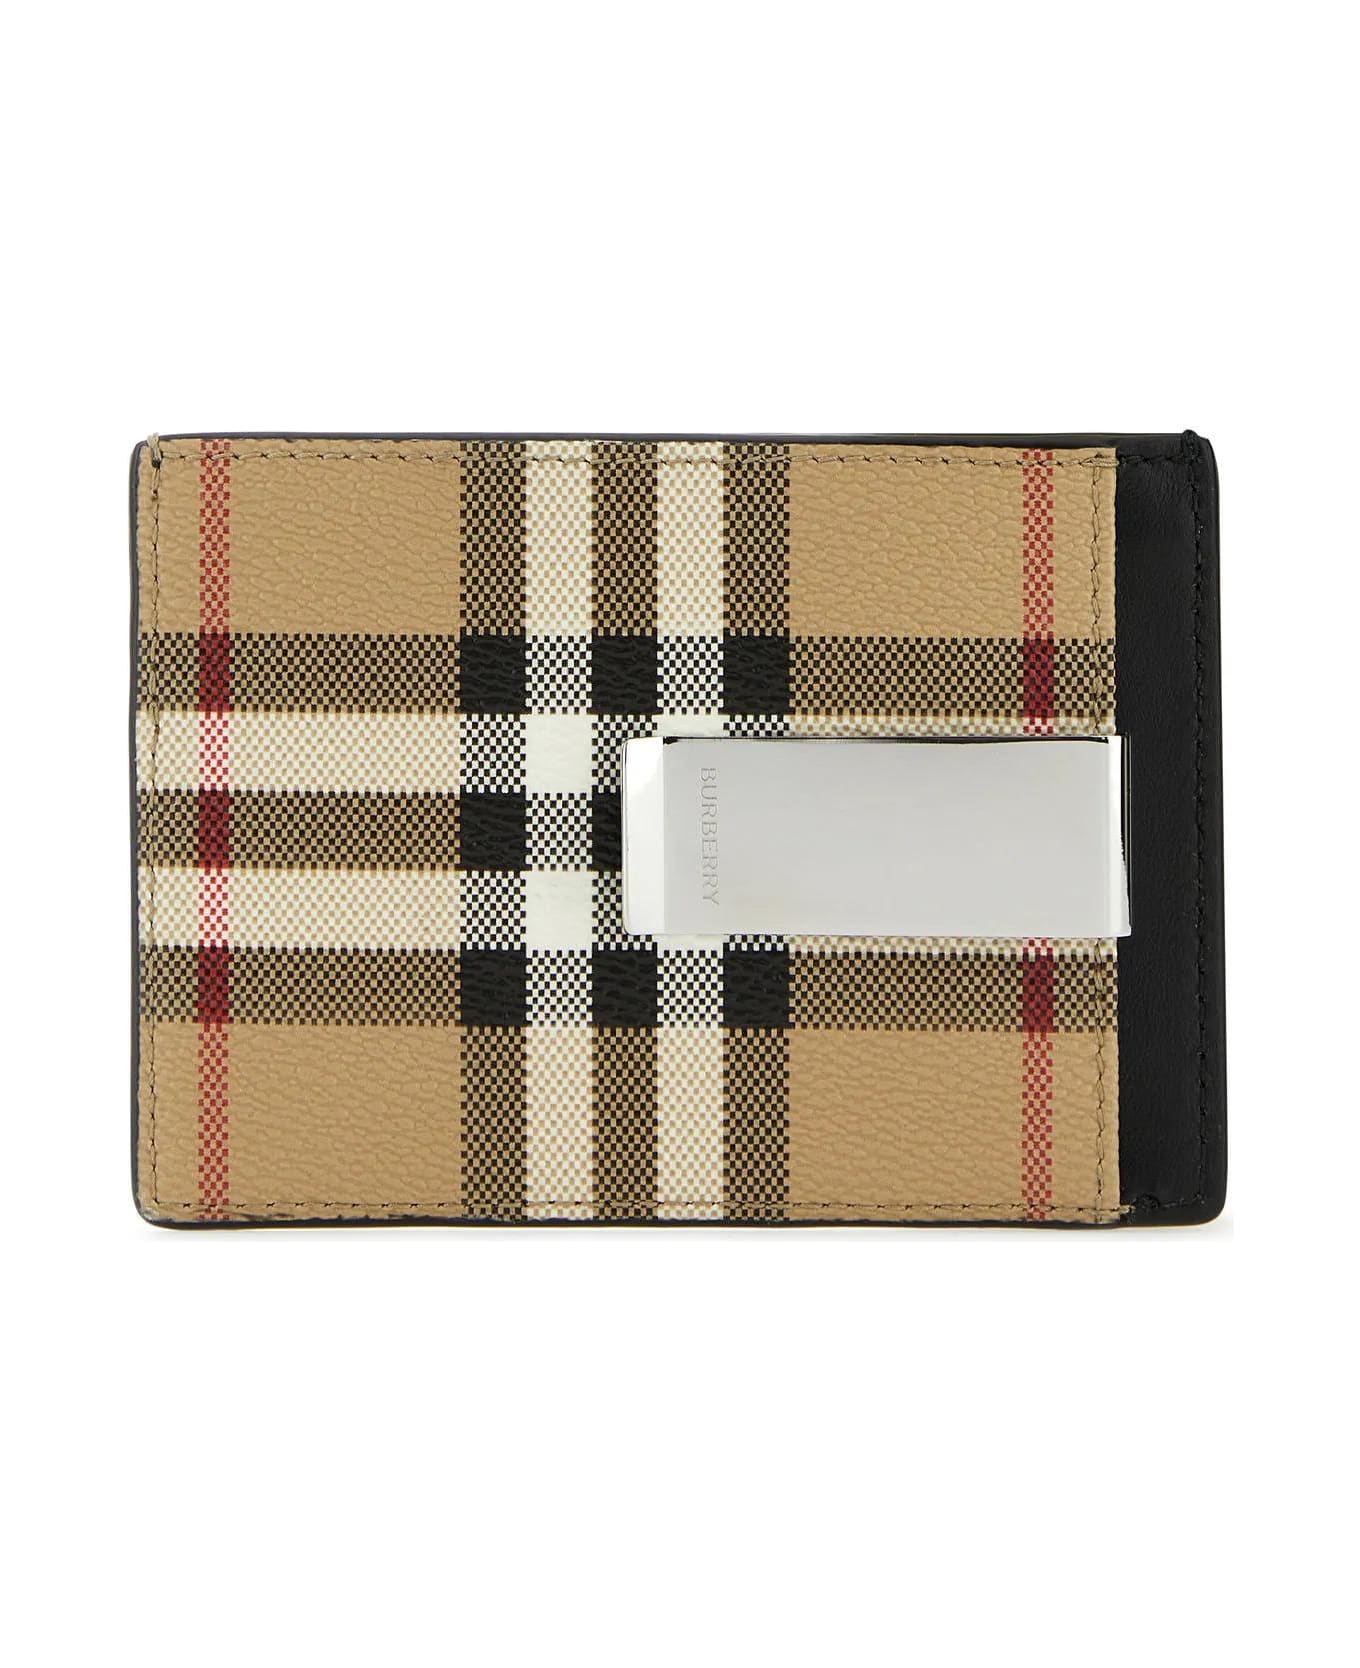 Burberry Printed Canvas Cardholder - Archive Beige